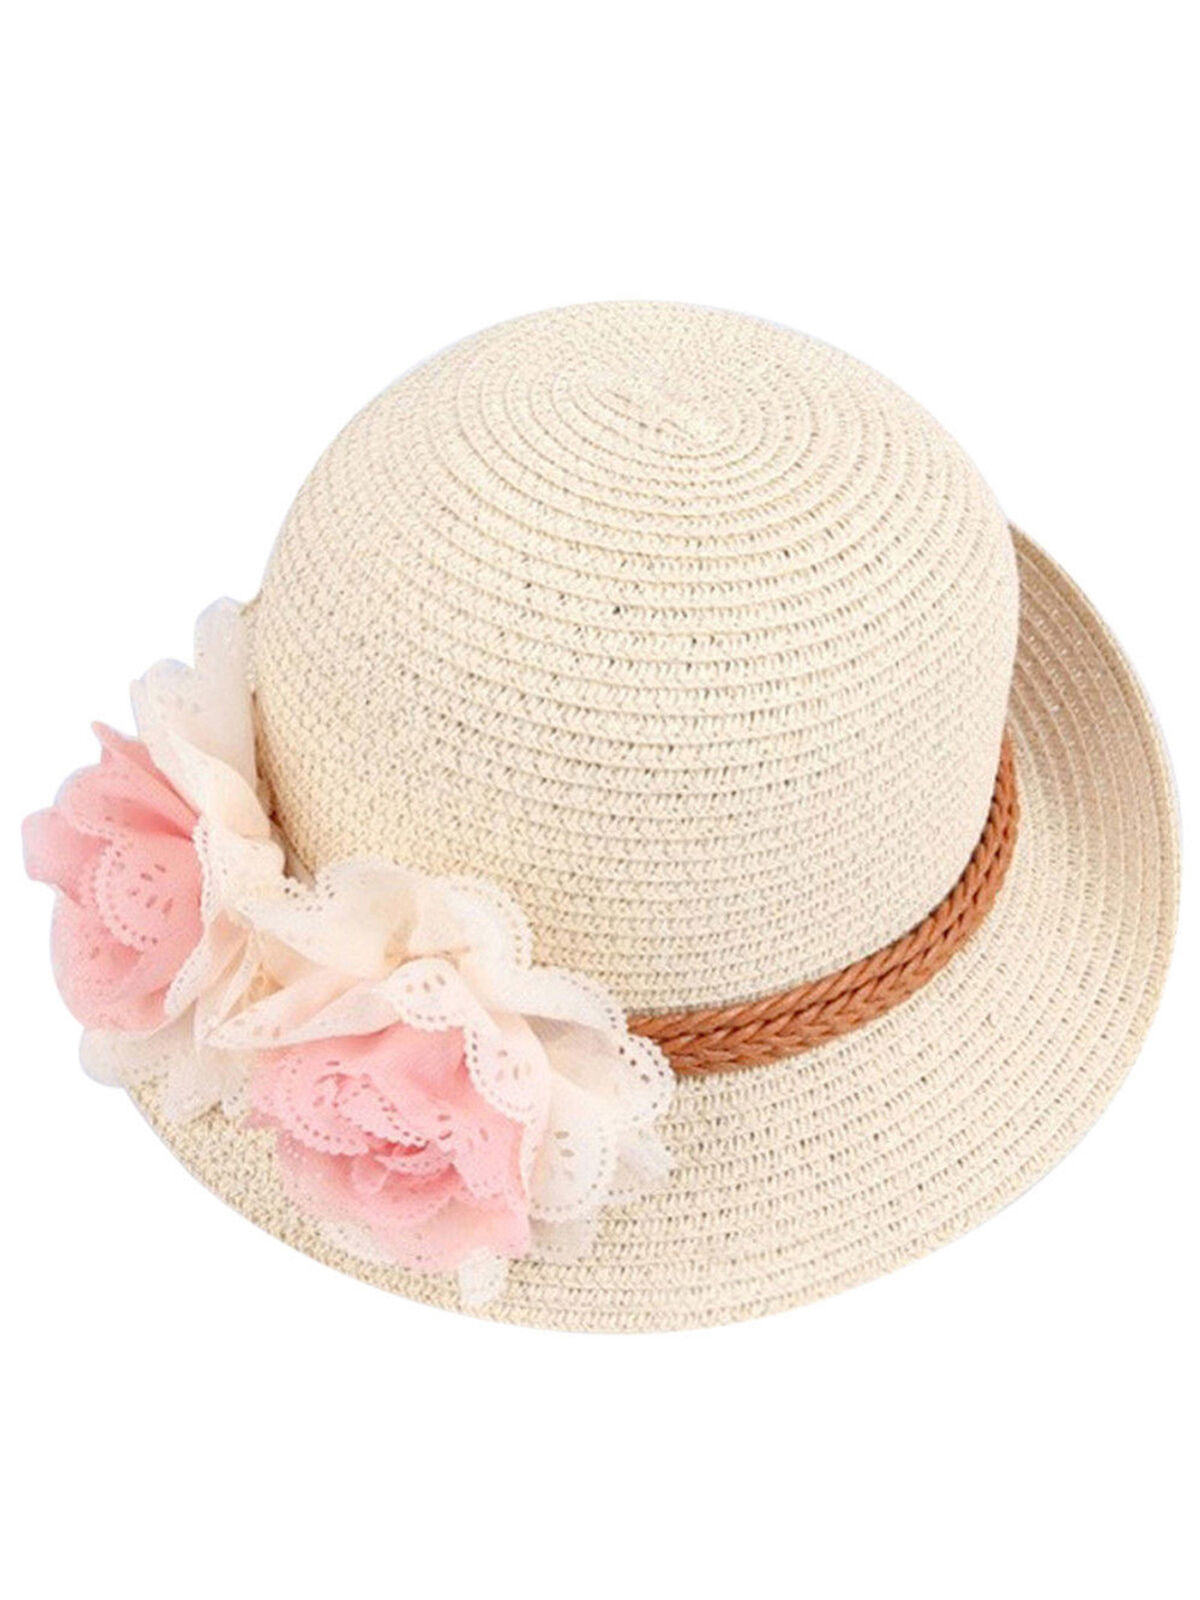 Toddler Baby Flower Decor Breathable Hat Straw Sun Hat Kids Hat Girls Hats - image 4 of 5